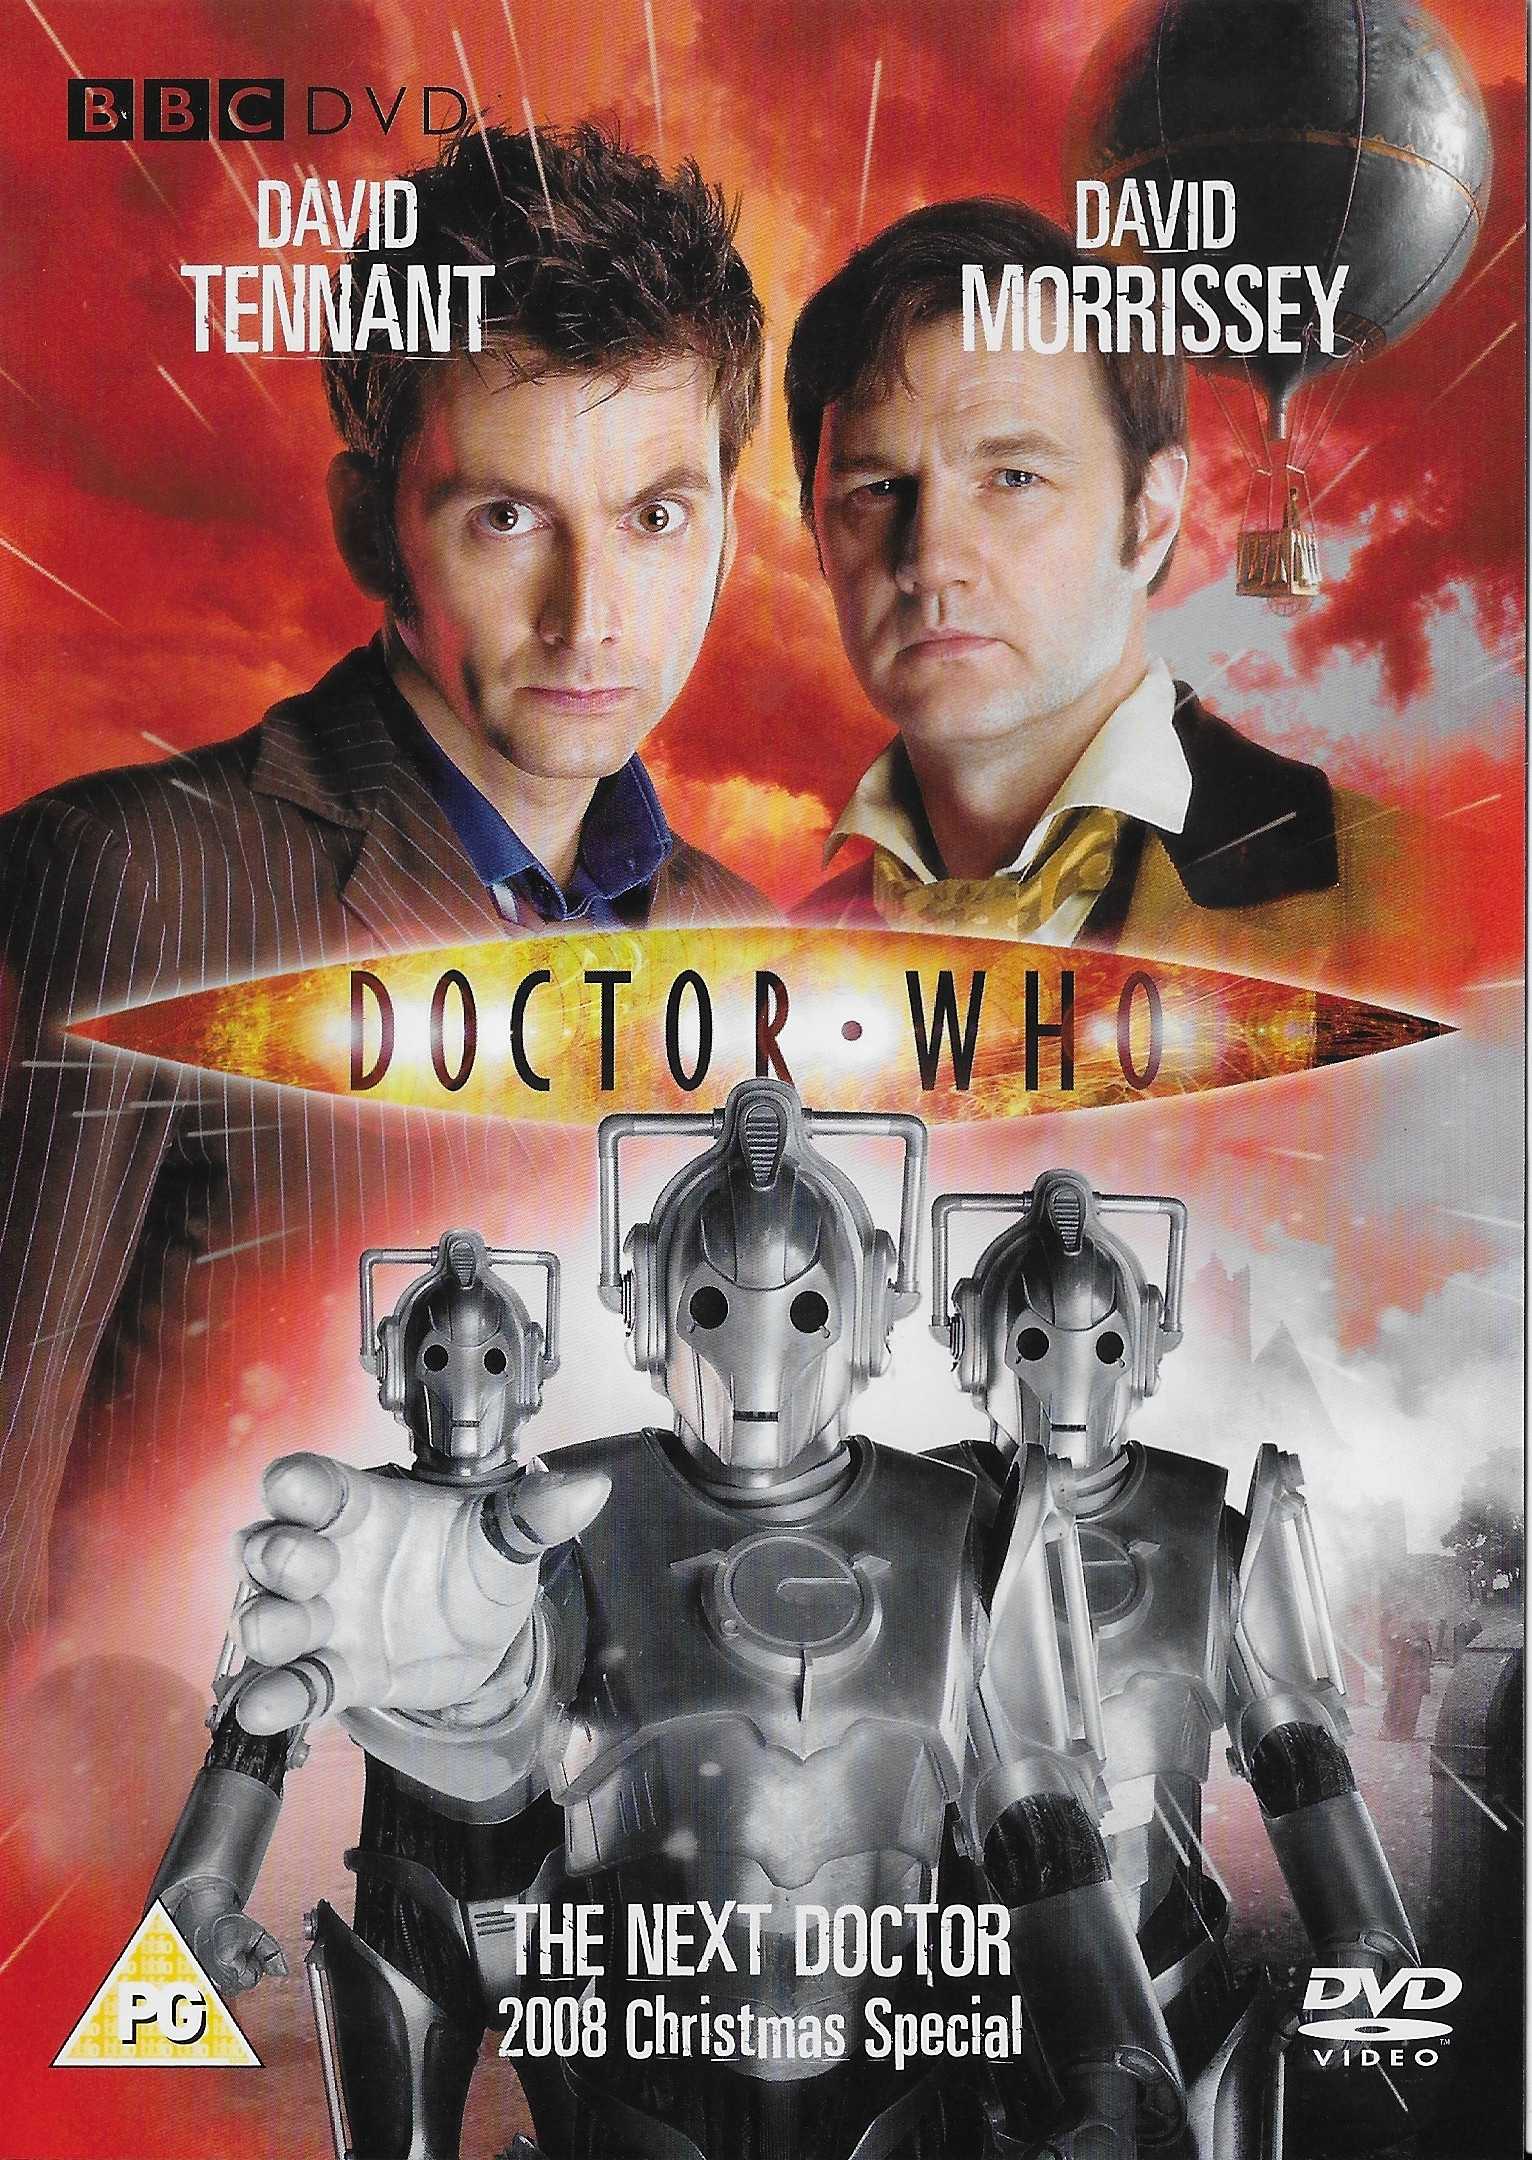 Picture of BBCDVD 2903 Doctor Who - The next doctor by artist Russell T Davies from the BBC records and Tapes library